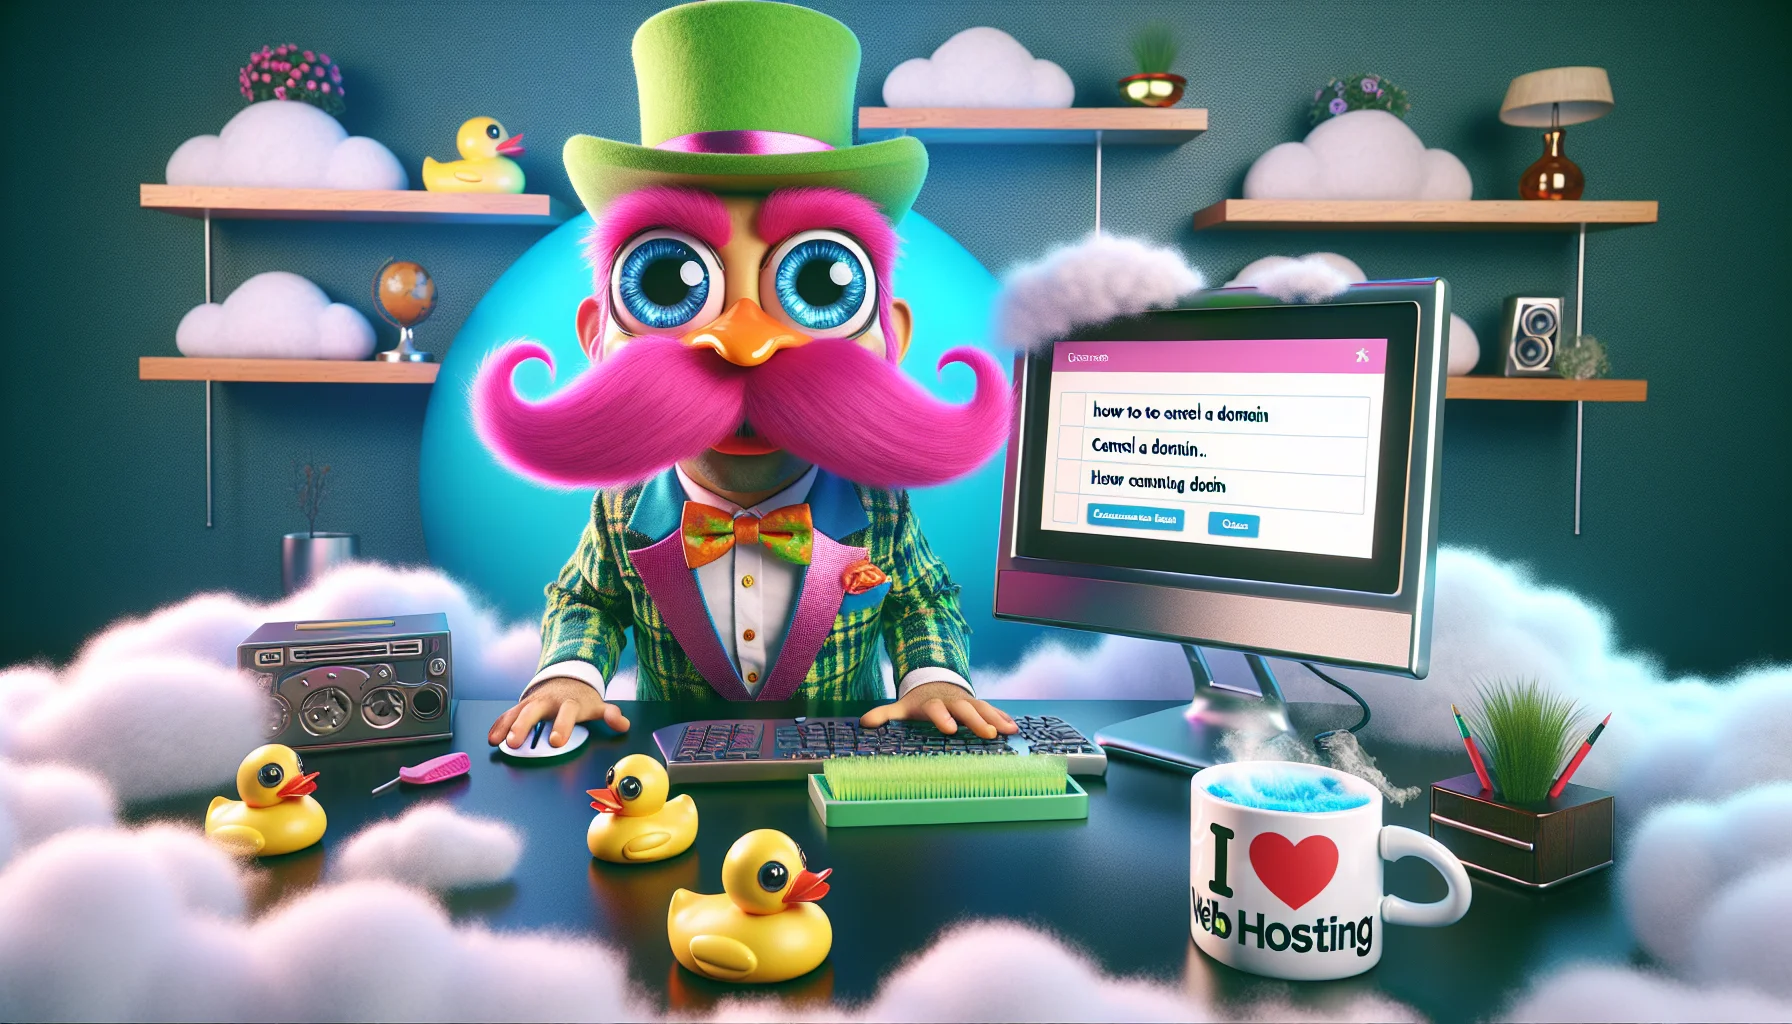 Create an amusing scene where a flamboyantly dressed cartoon character, with a bright pink handlebar mustache, gleaming eyes, and a green top hat, is sitting in a cloud-themed room. He is behind a futuristic computer showcasing how to cancel a domain on a placeholder website. The room is littered with humorous elements like duck-shaped floating desk ornaments, a steaming mug with 'I love Web Hosting' written on it, and quirky little cloud-shaped cushions scattered around. The atmosphere should feel comfortable and enticing for the field of web hosting.